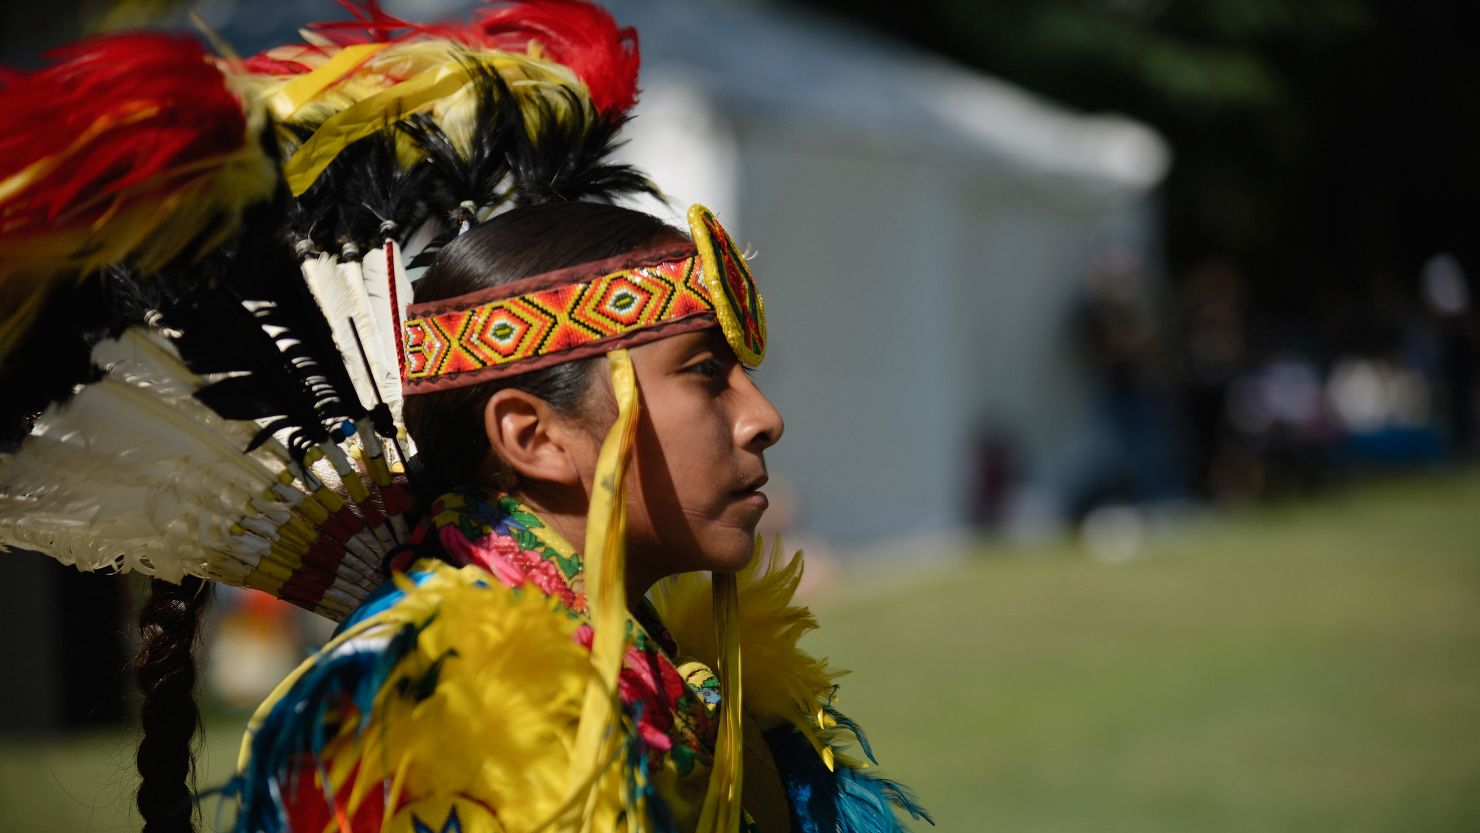 An attendee seen at the inaugural Indigenous Peoples Day Celebration at Los Angeles Grand Park on October 8, 2018.